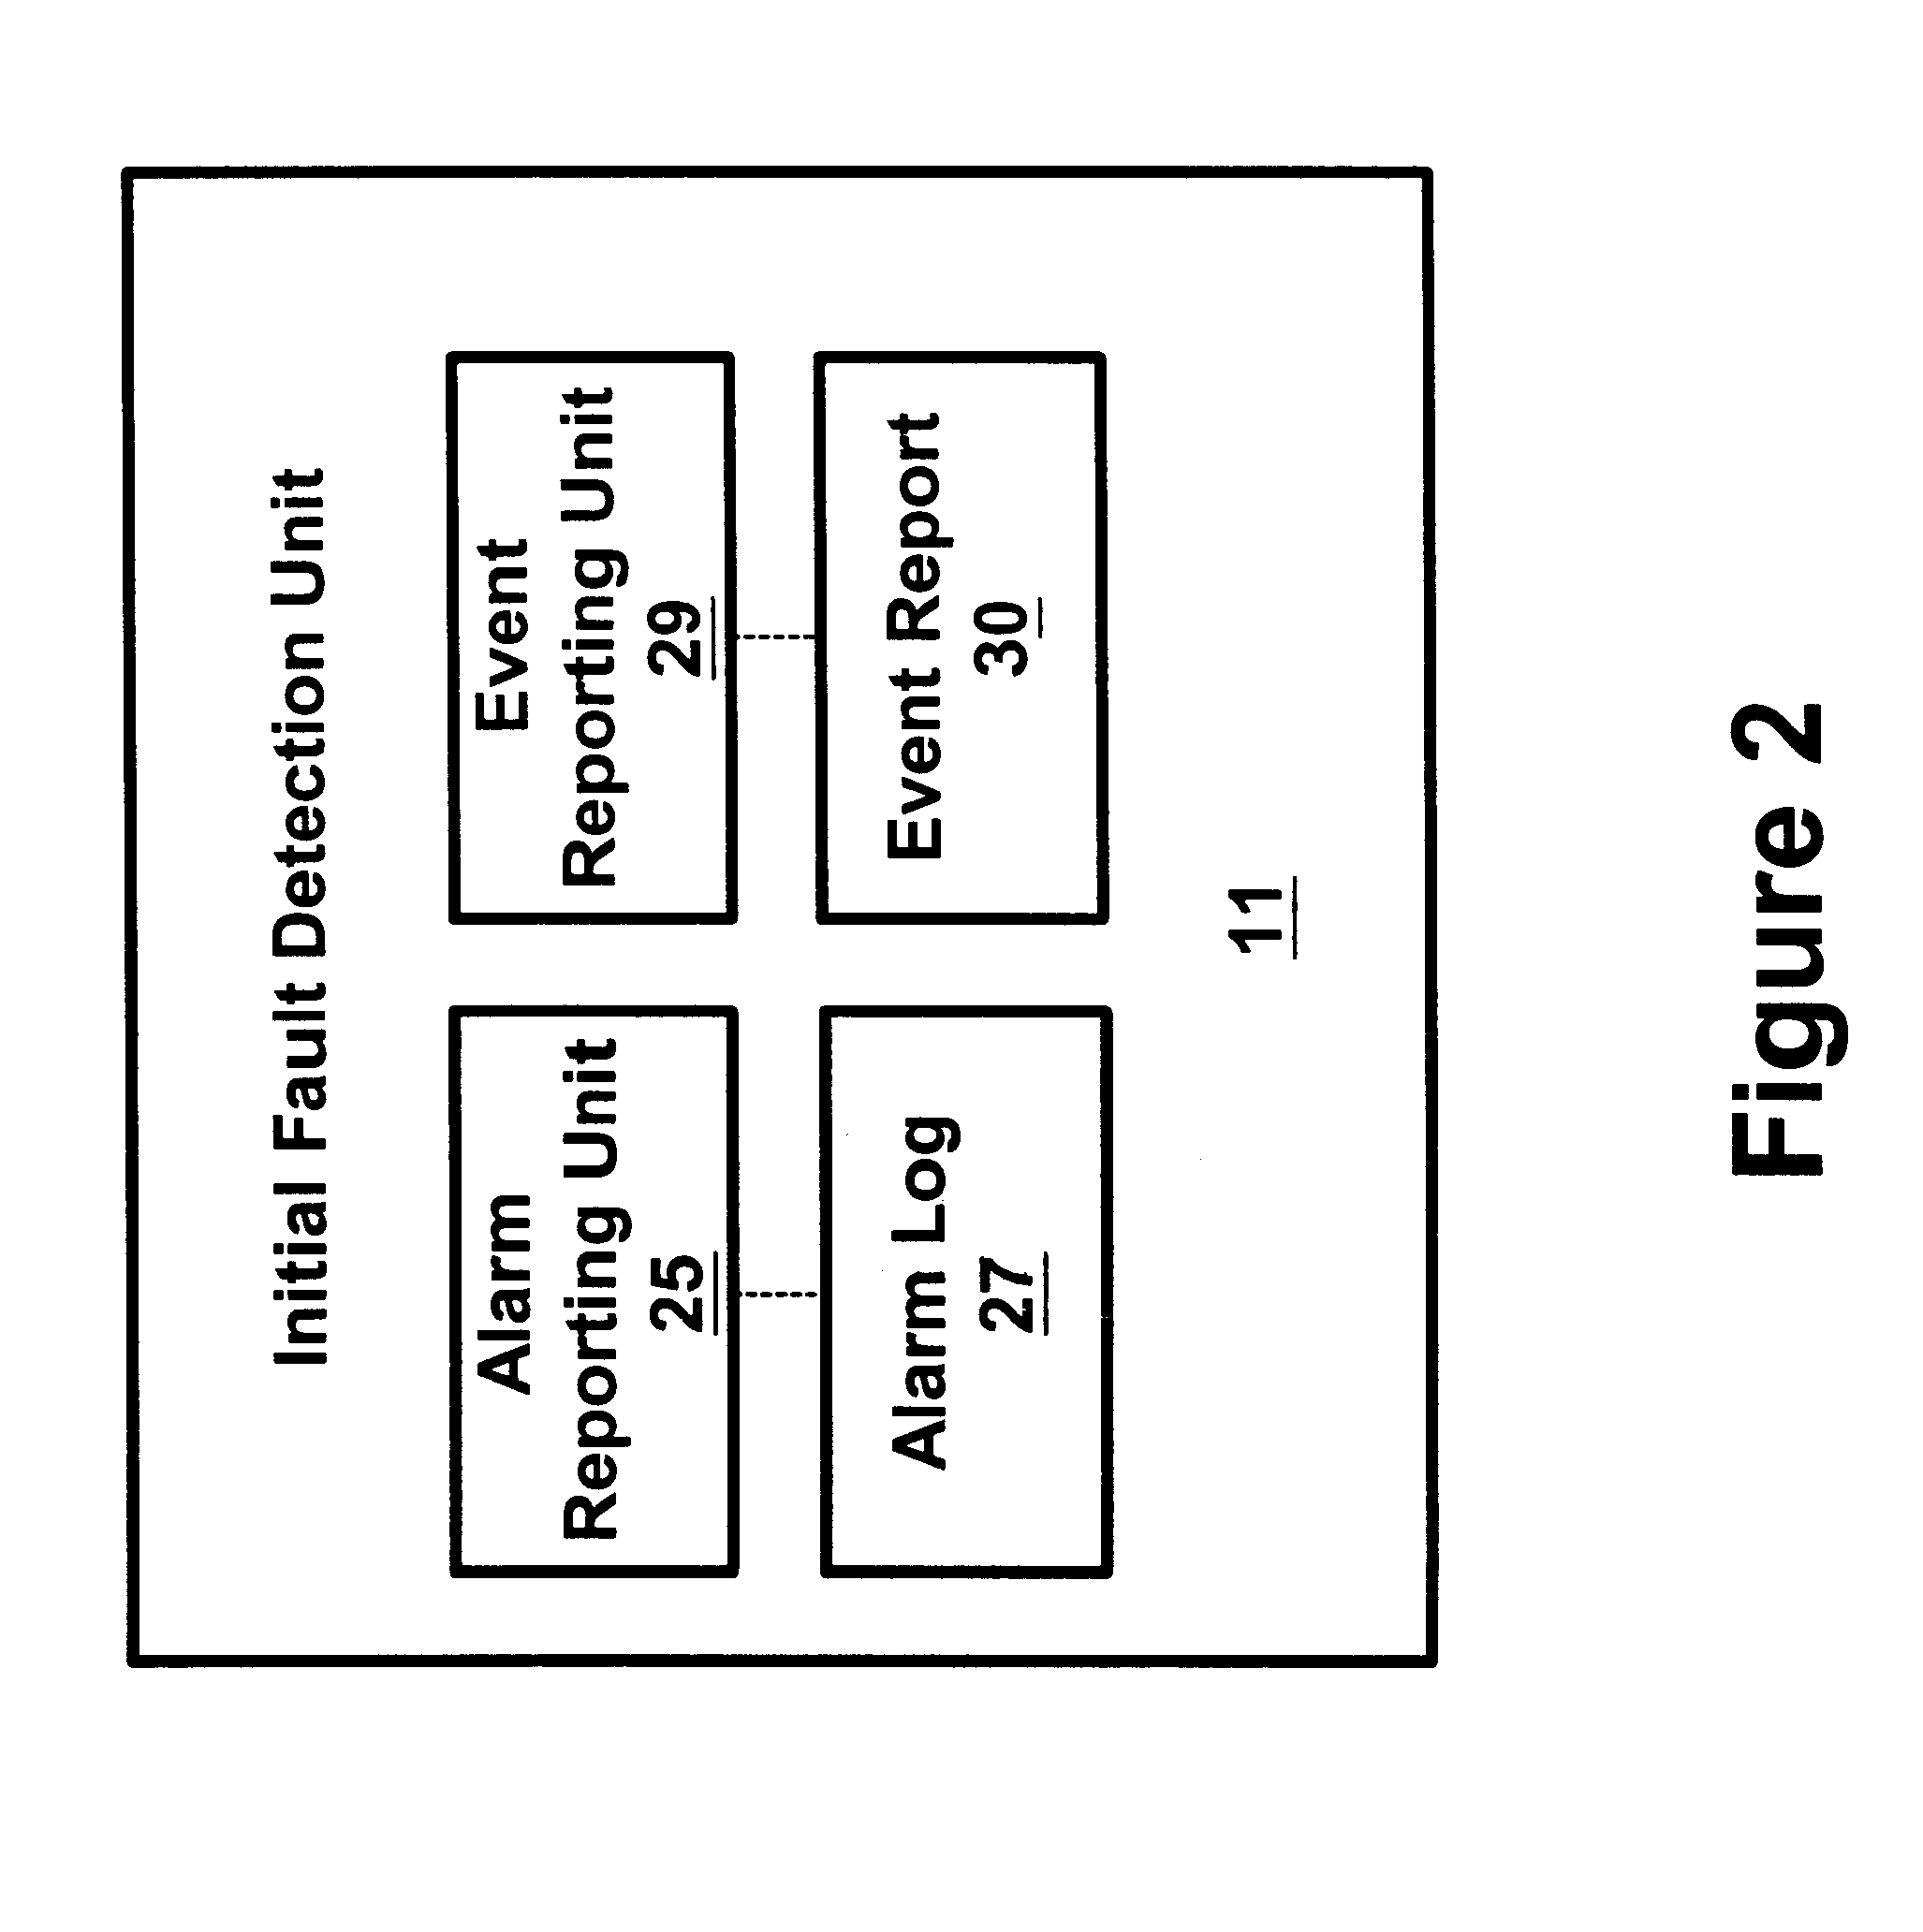 Fault detection control system using dual bus architecture, and methods of using same